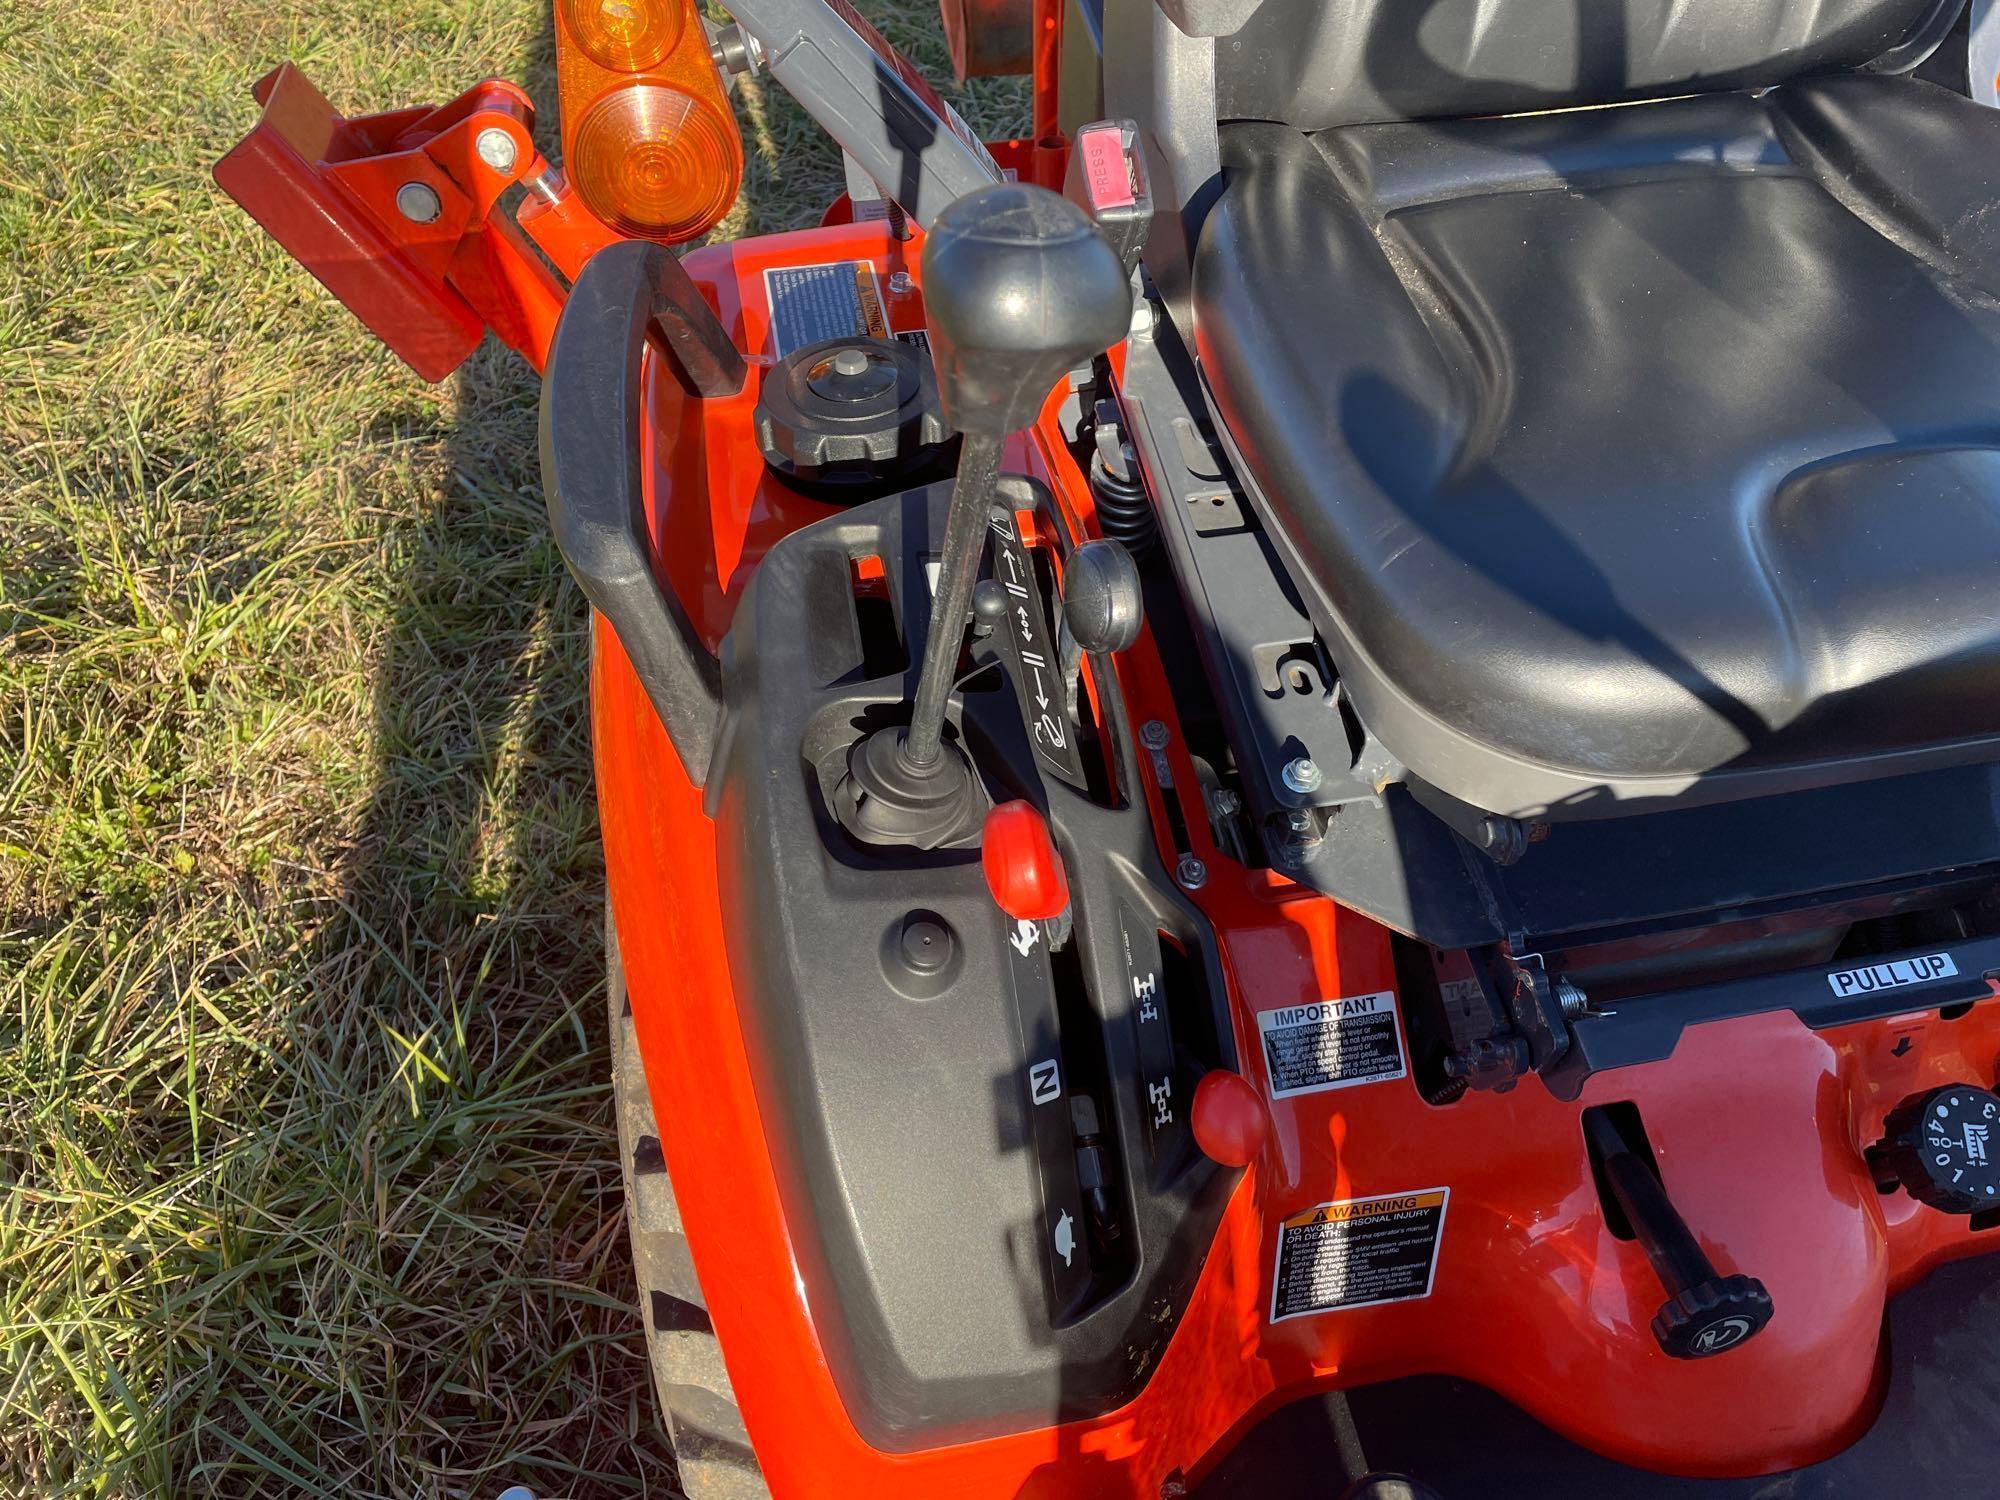 Kubota BX23S 4x4 Tractor with Loader and Backhoe